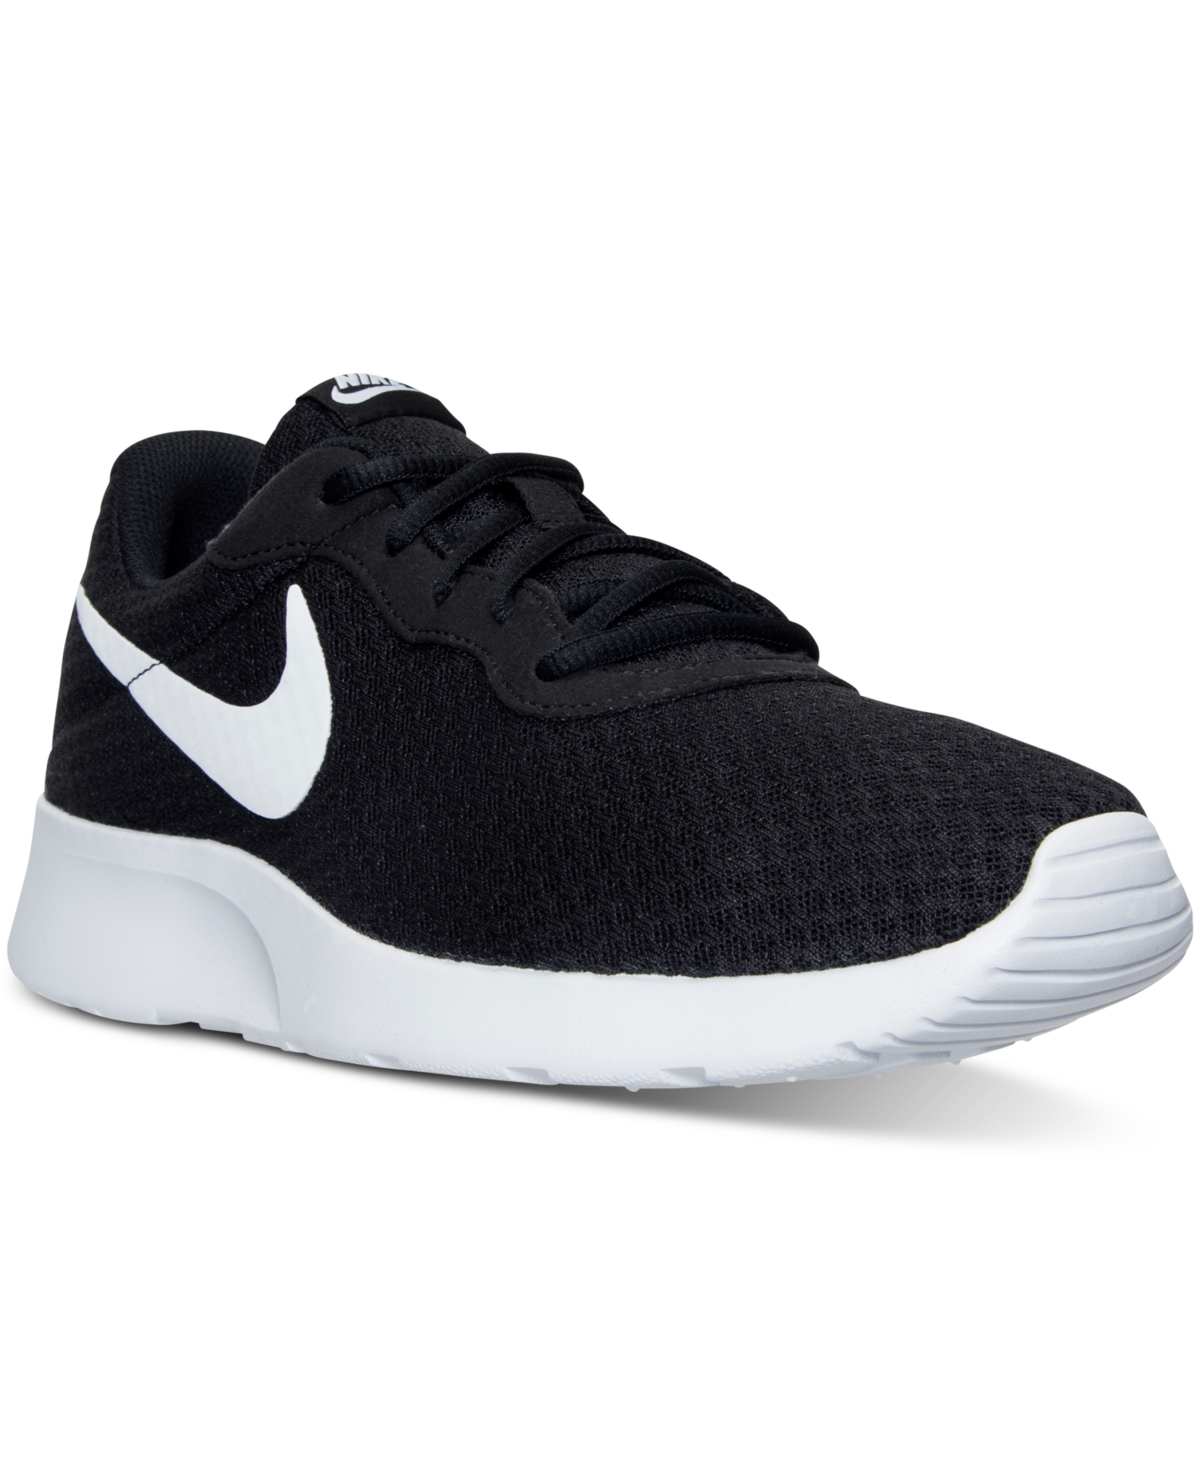 UPC 685068835018 product image for Nike Men's Tanjun Casual Sneakers from Finish Line | upcitemdb.com